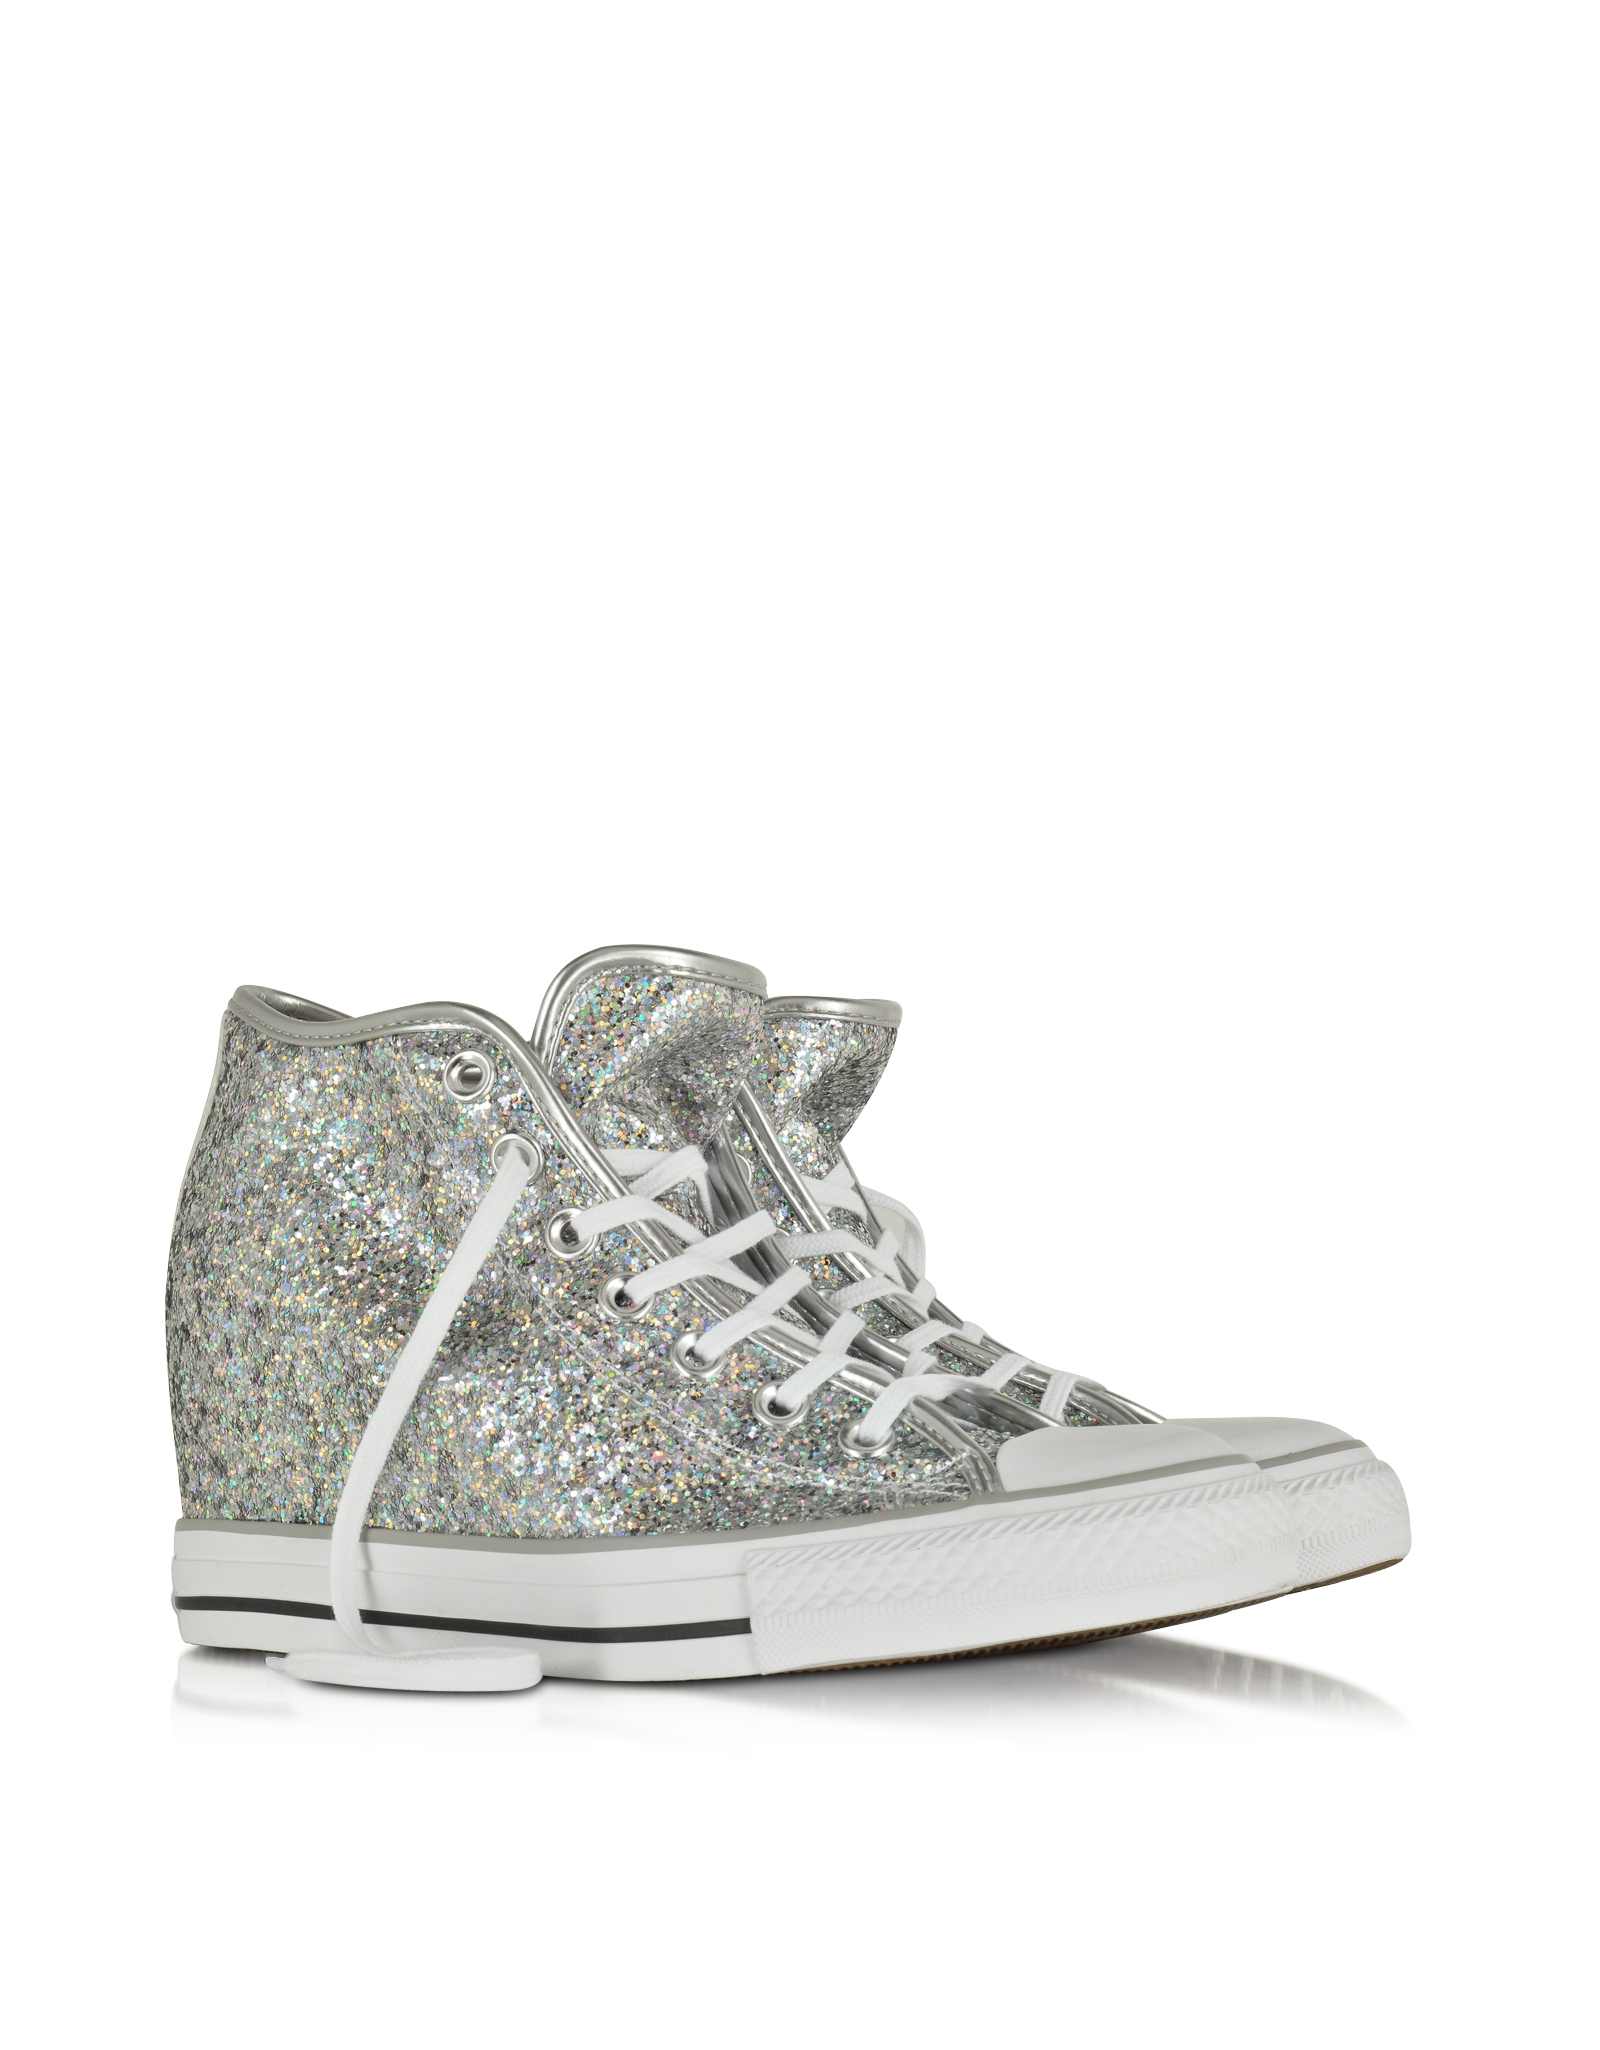 converse all star mid lux sequins